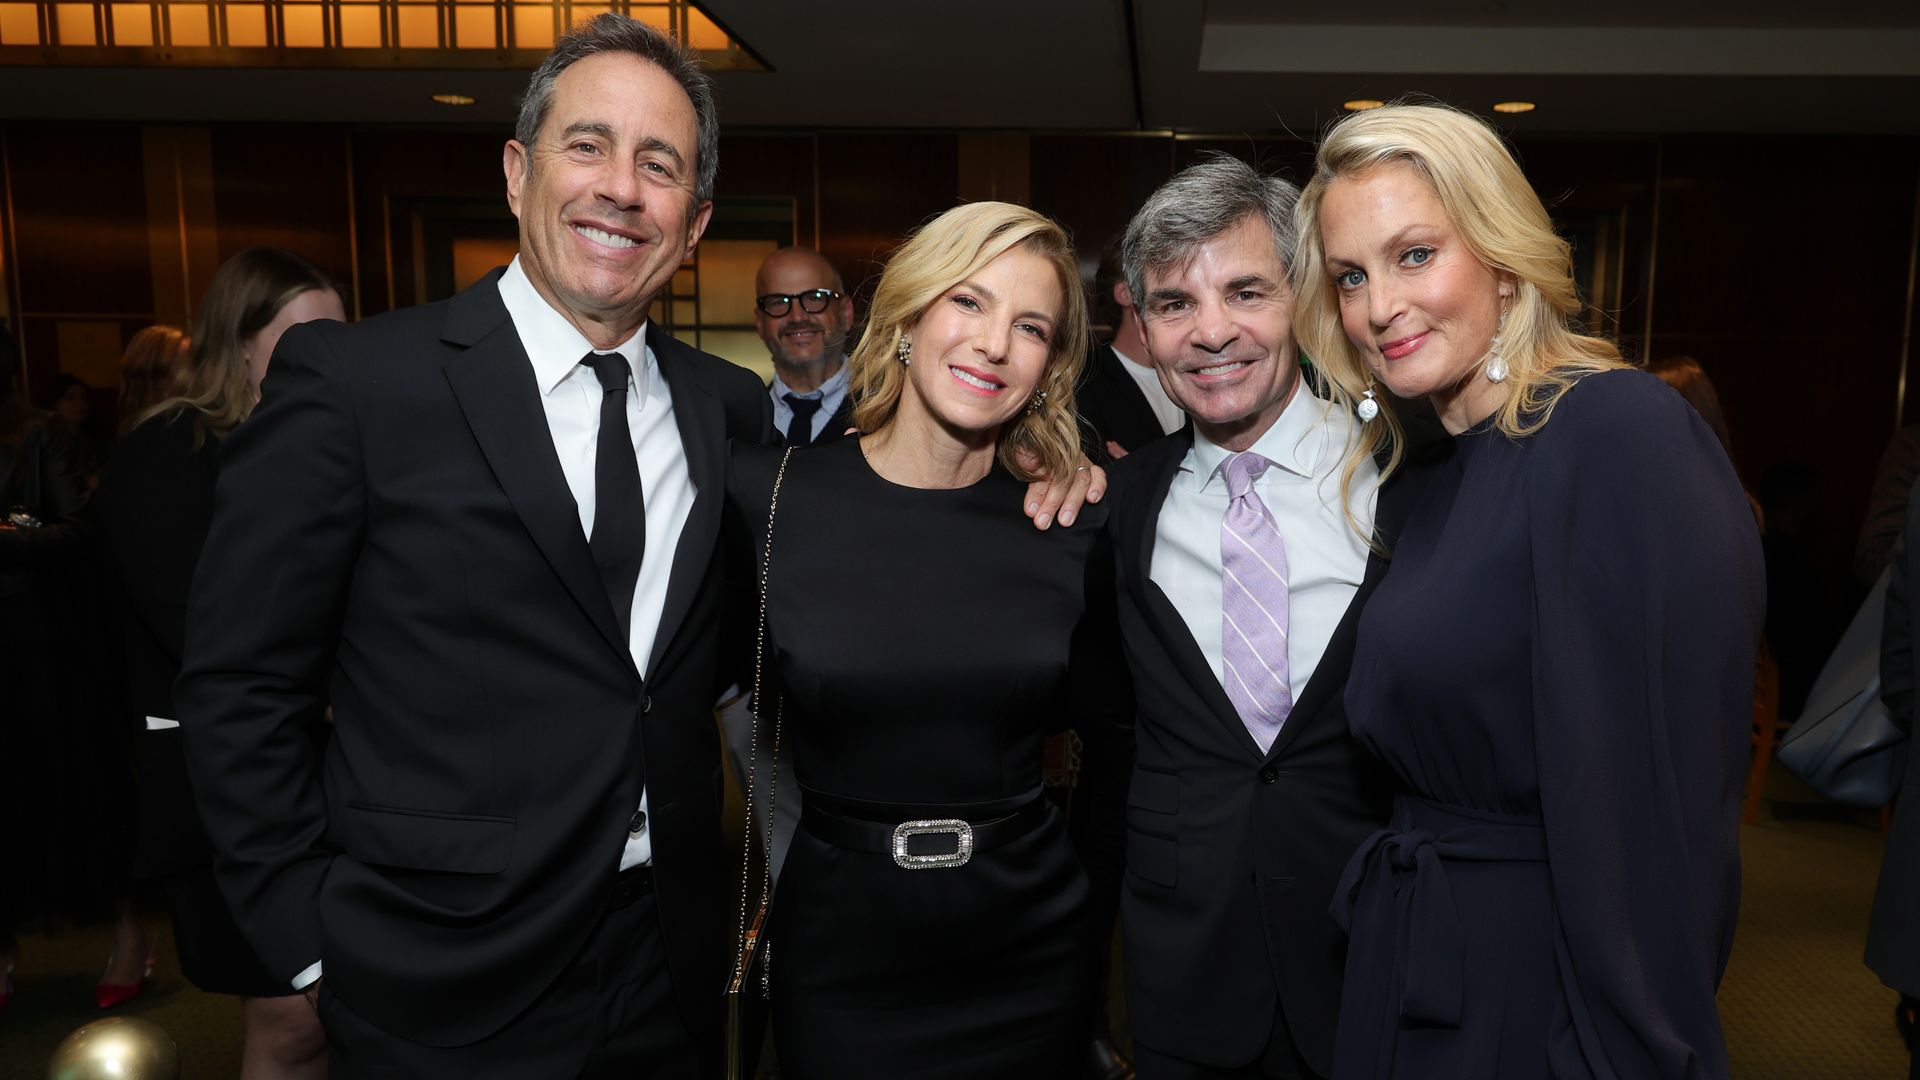 George Stephanopoulos, Ali Wentworth, Jerry Seinfeld and Jessica Seinfeld 